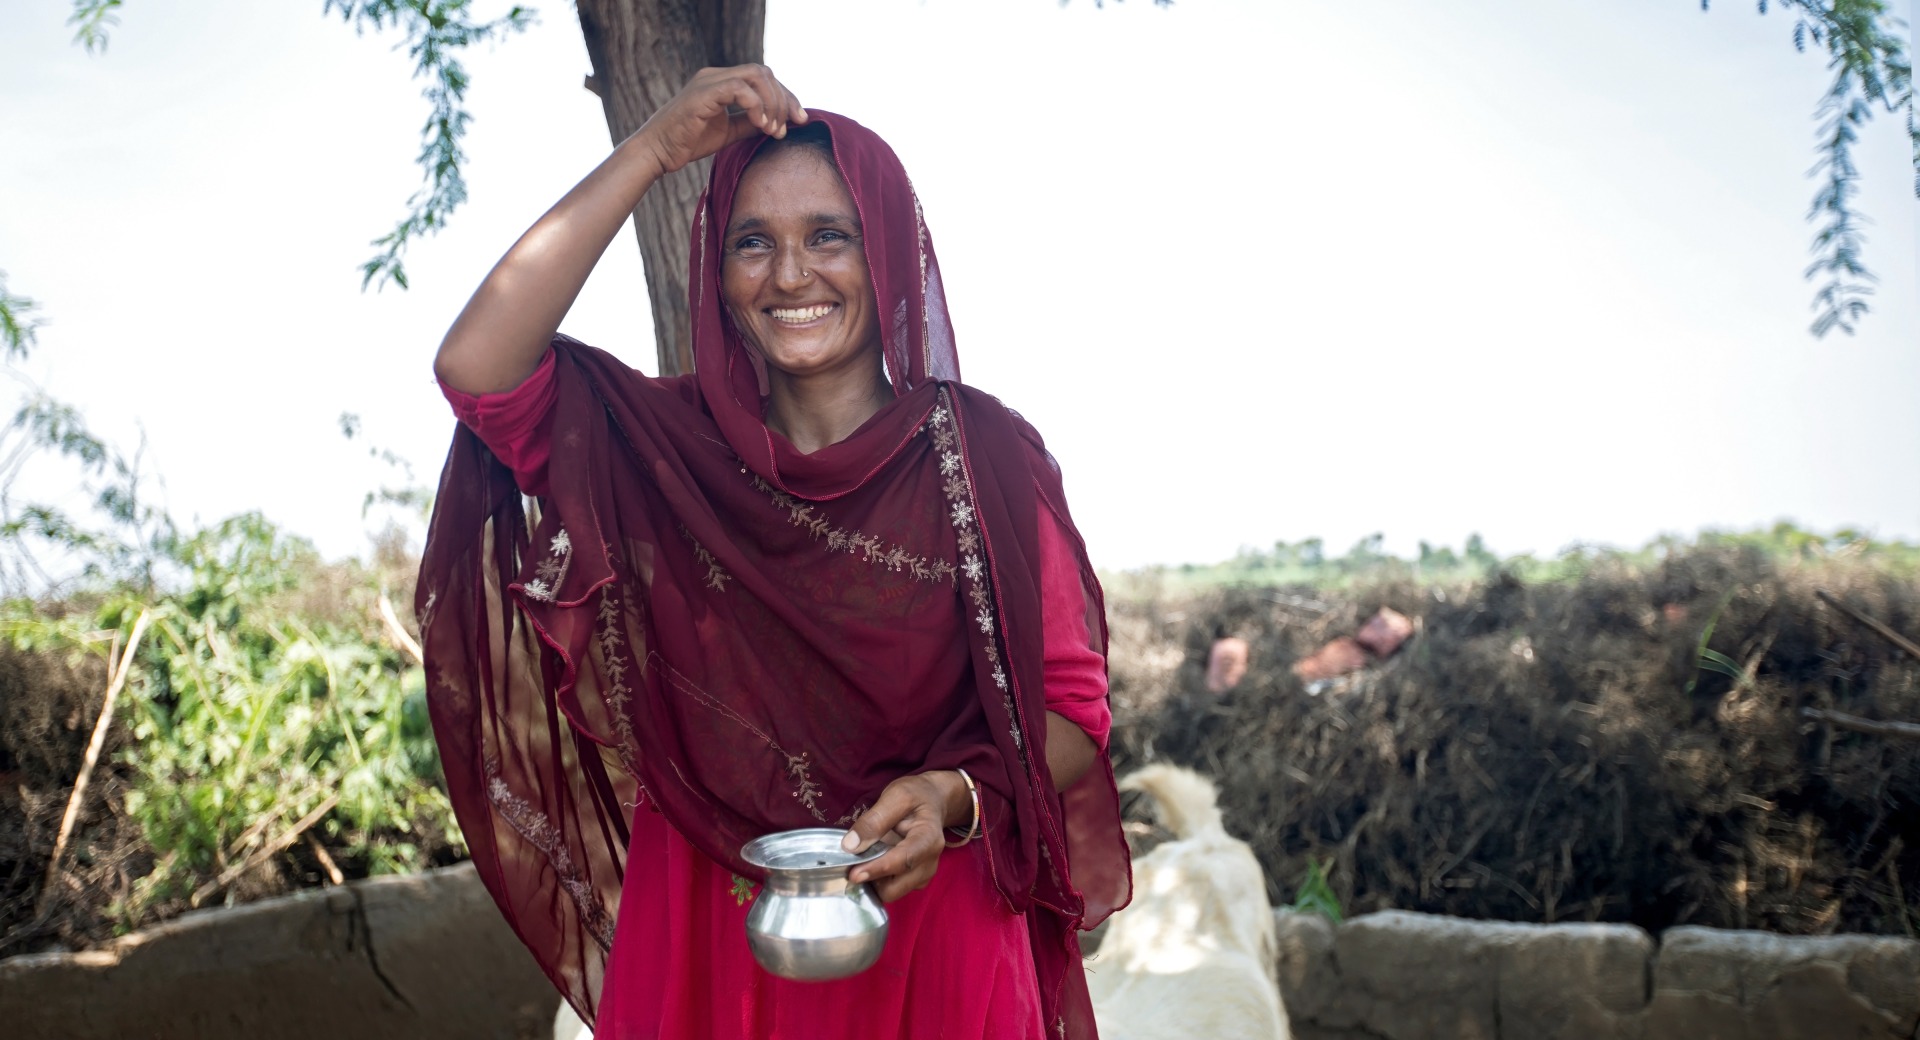 Zareena, 25, is a small scale entrepreneur who received two goats from our team. The goat milk has helped her improve her own nutrition as well and her children's.